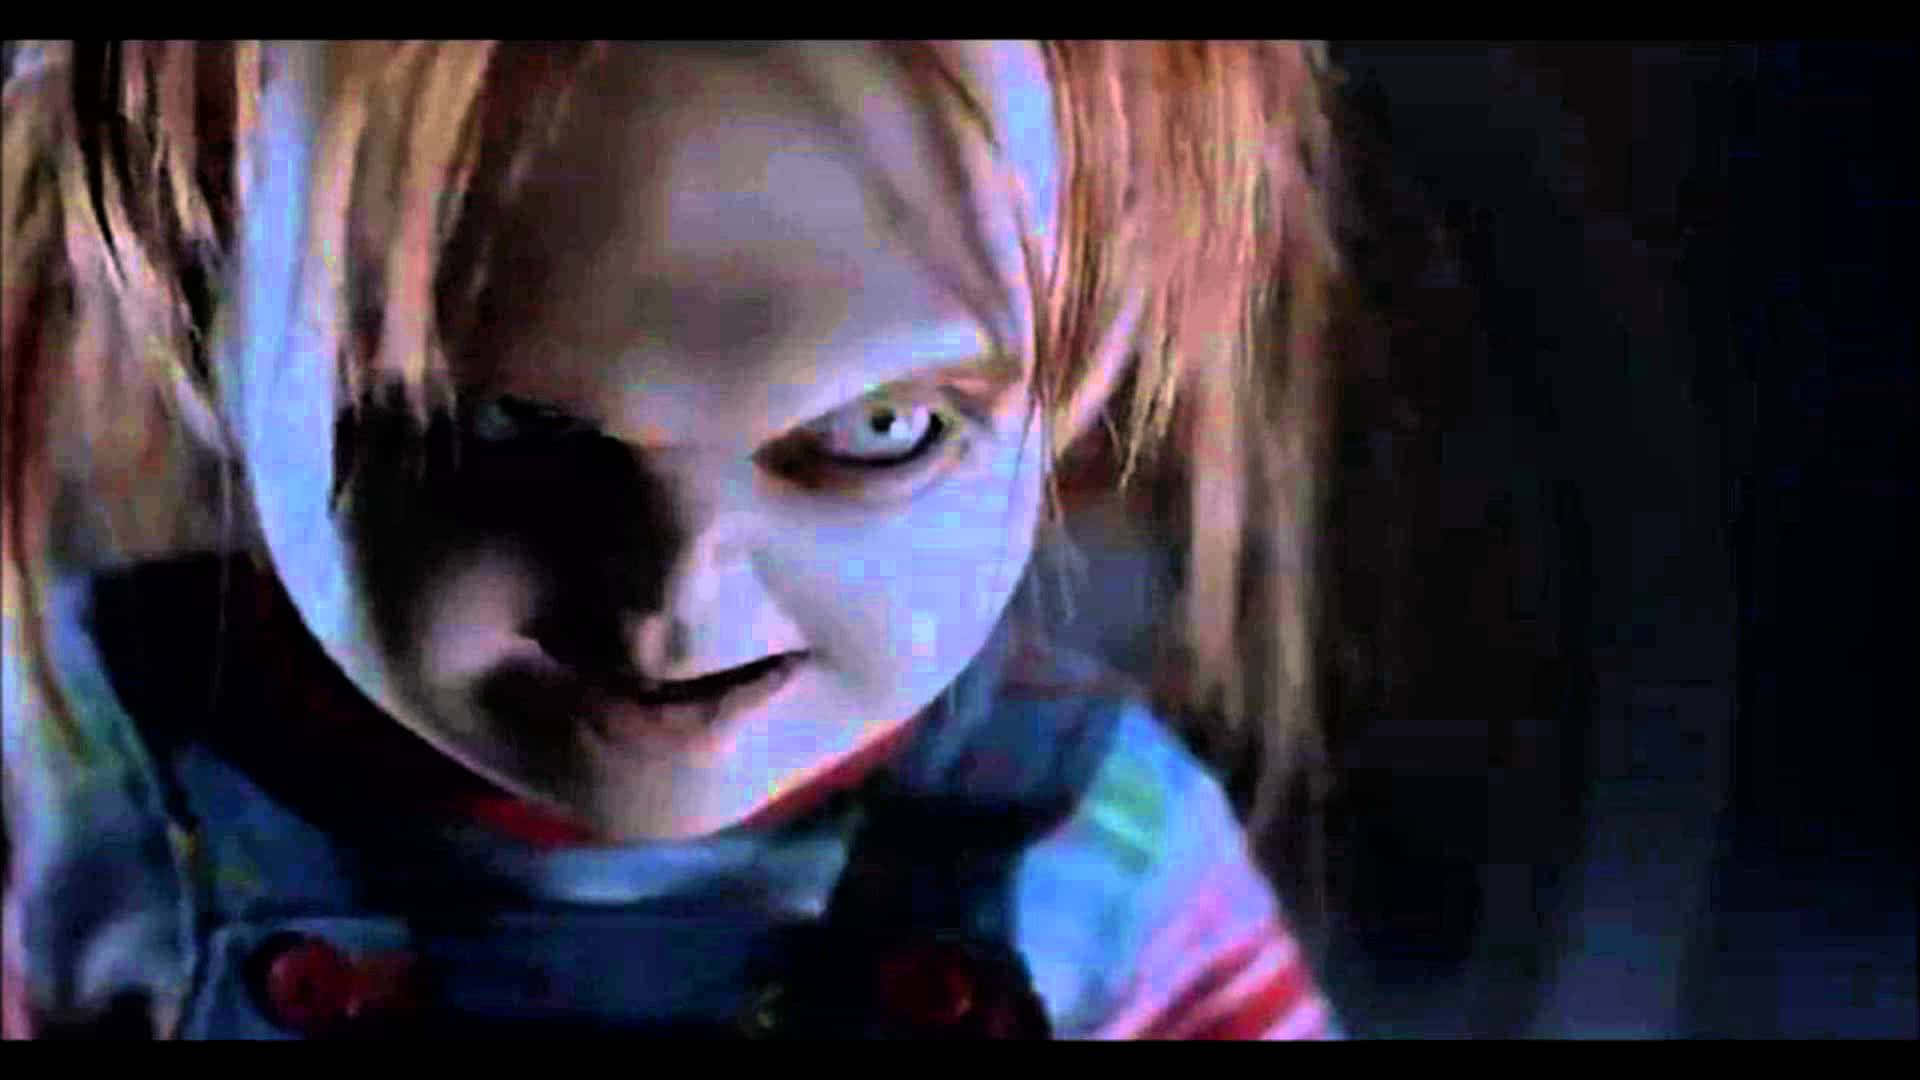 The Iconic Chucky Doll in Vivid Detail Wallpaper